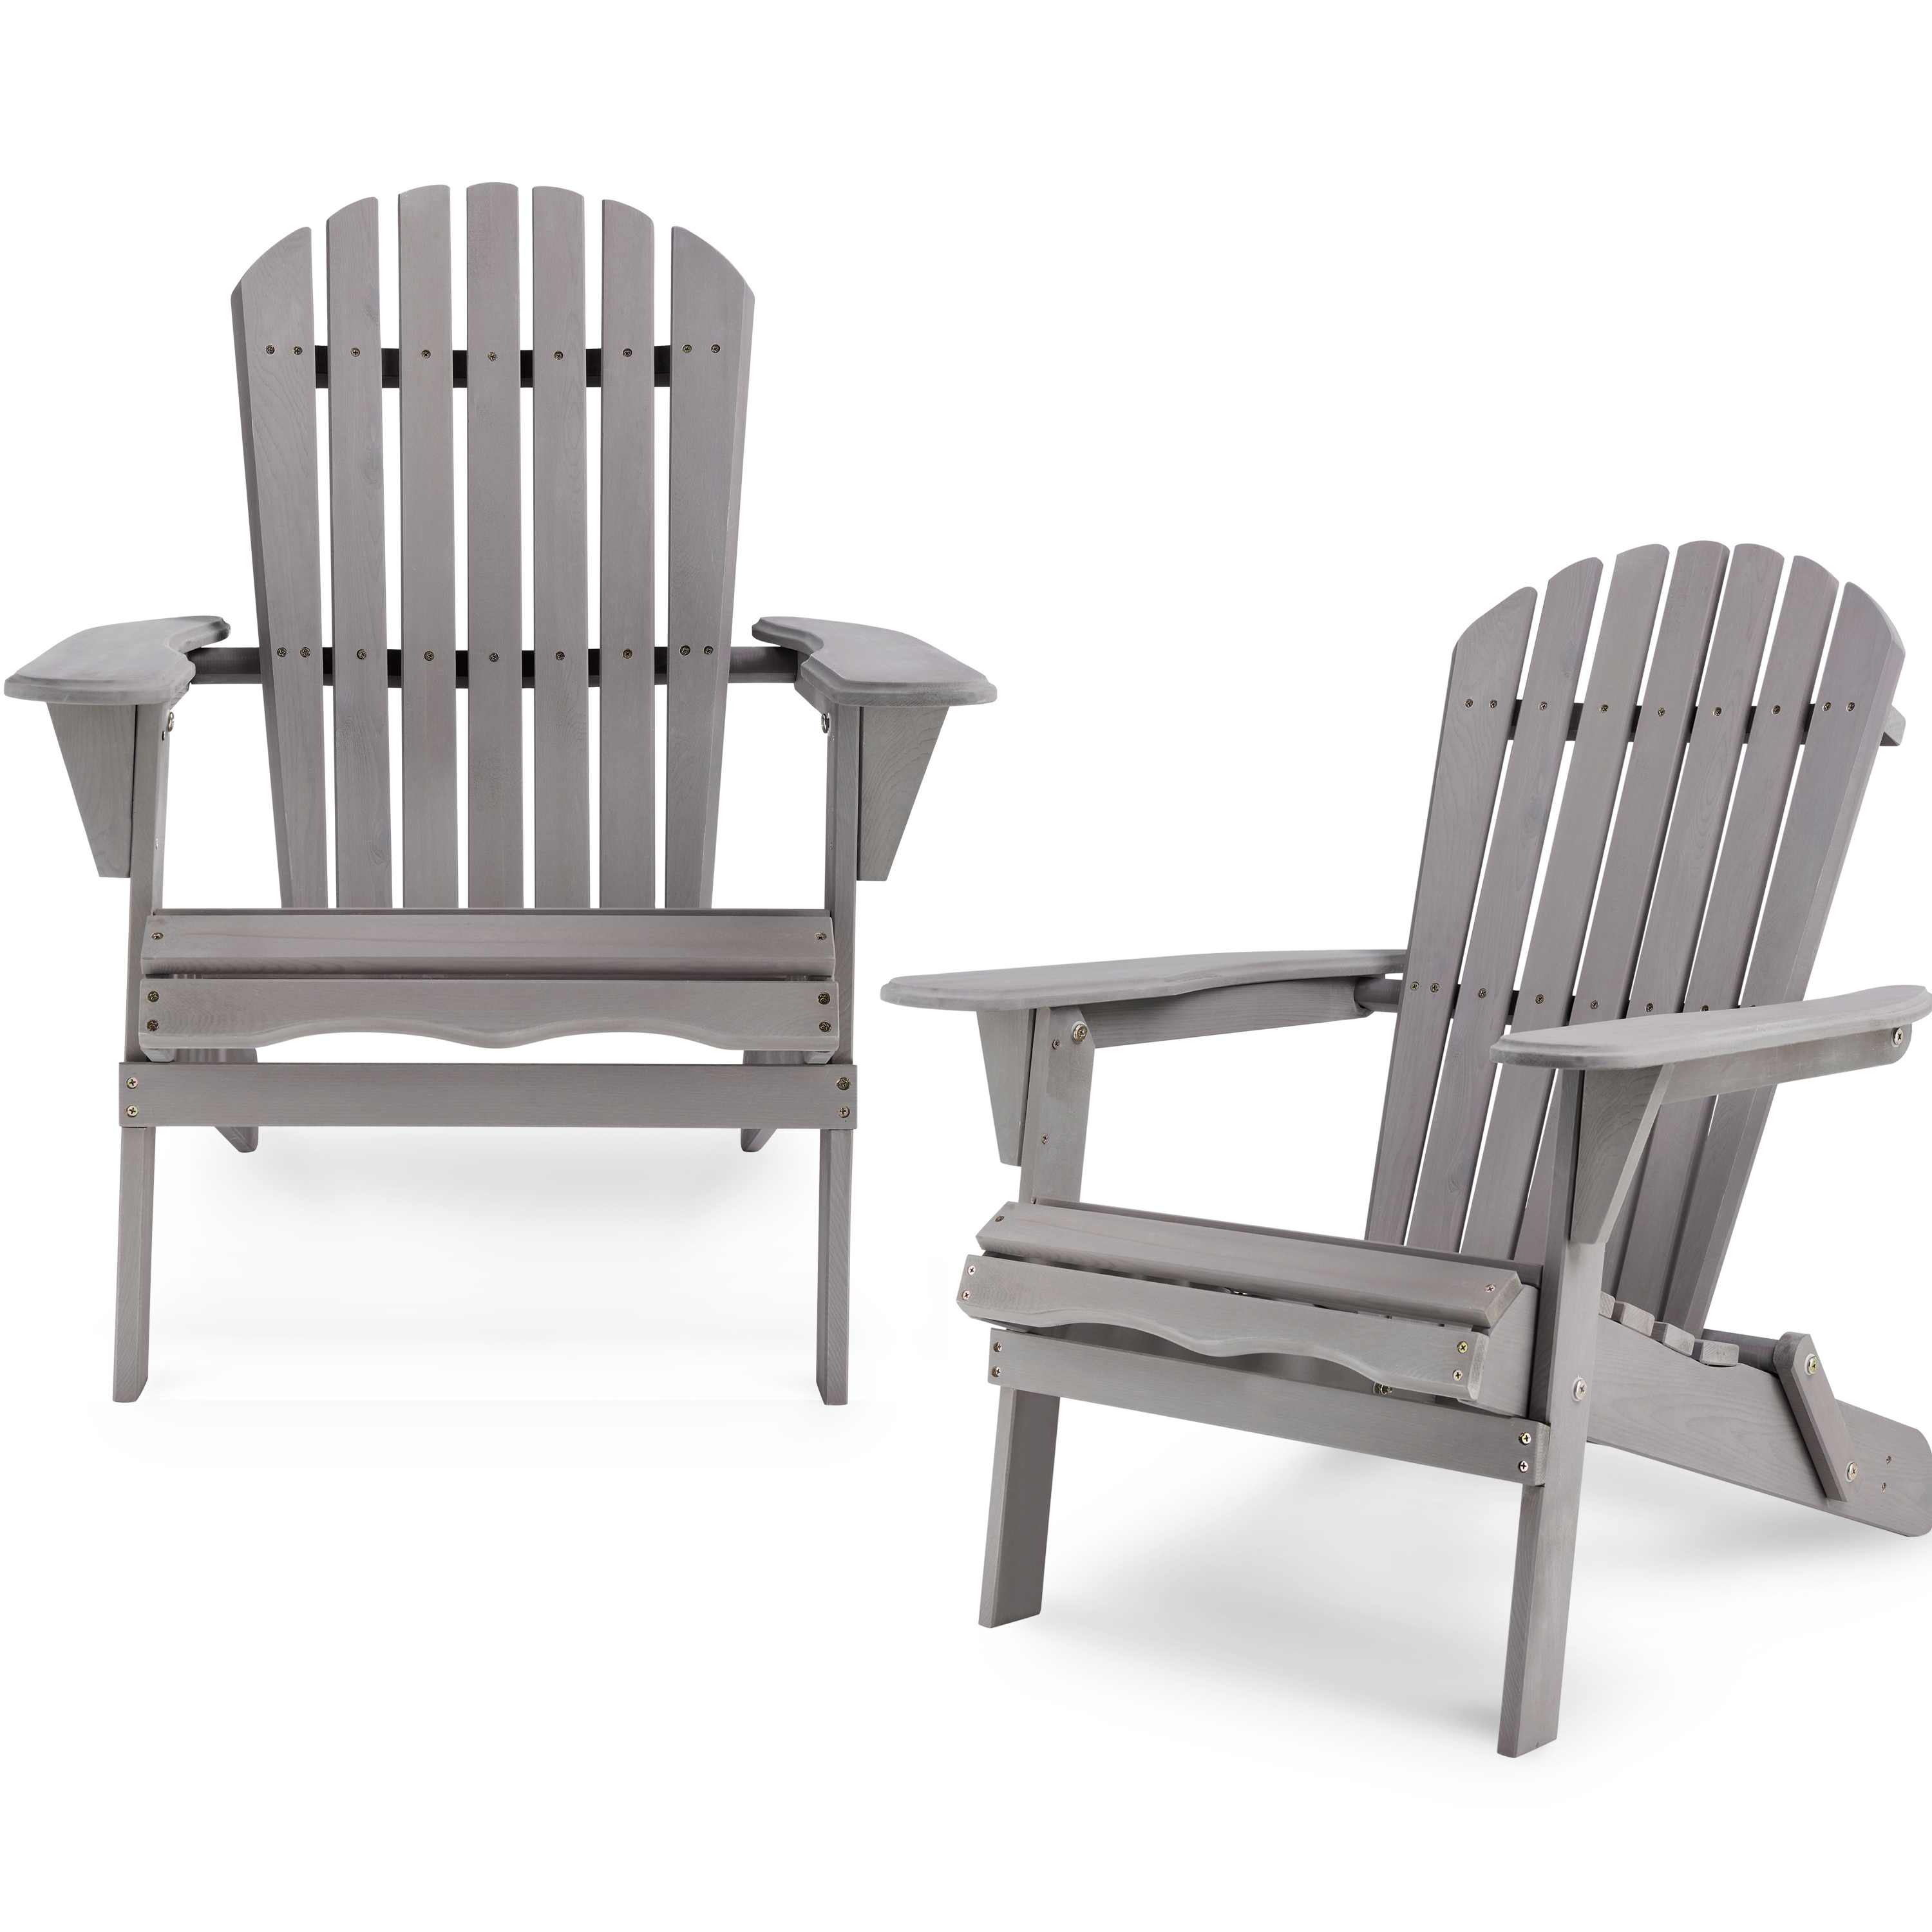 Wood Lounge Patio Chair for Garden Outdoor Wooden Folding Adirondack Chair Set of 2 Solid Cedar Wood Lounge Patio Chair for Garden, Lawn, Backyard, - image 5 of 5